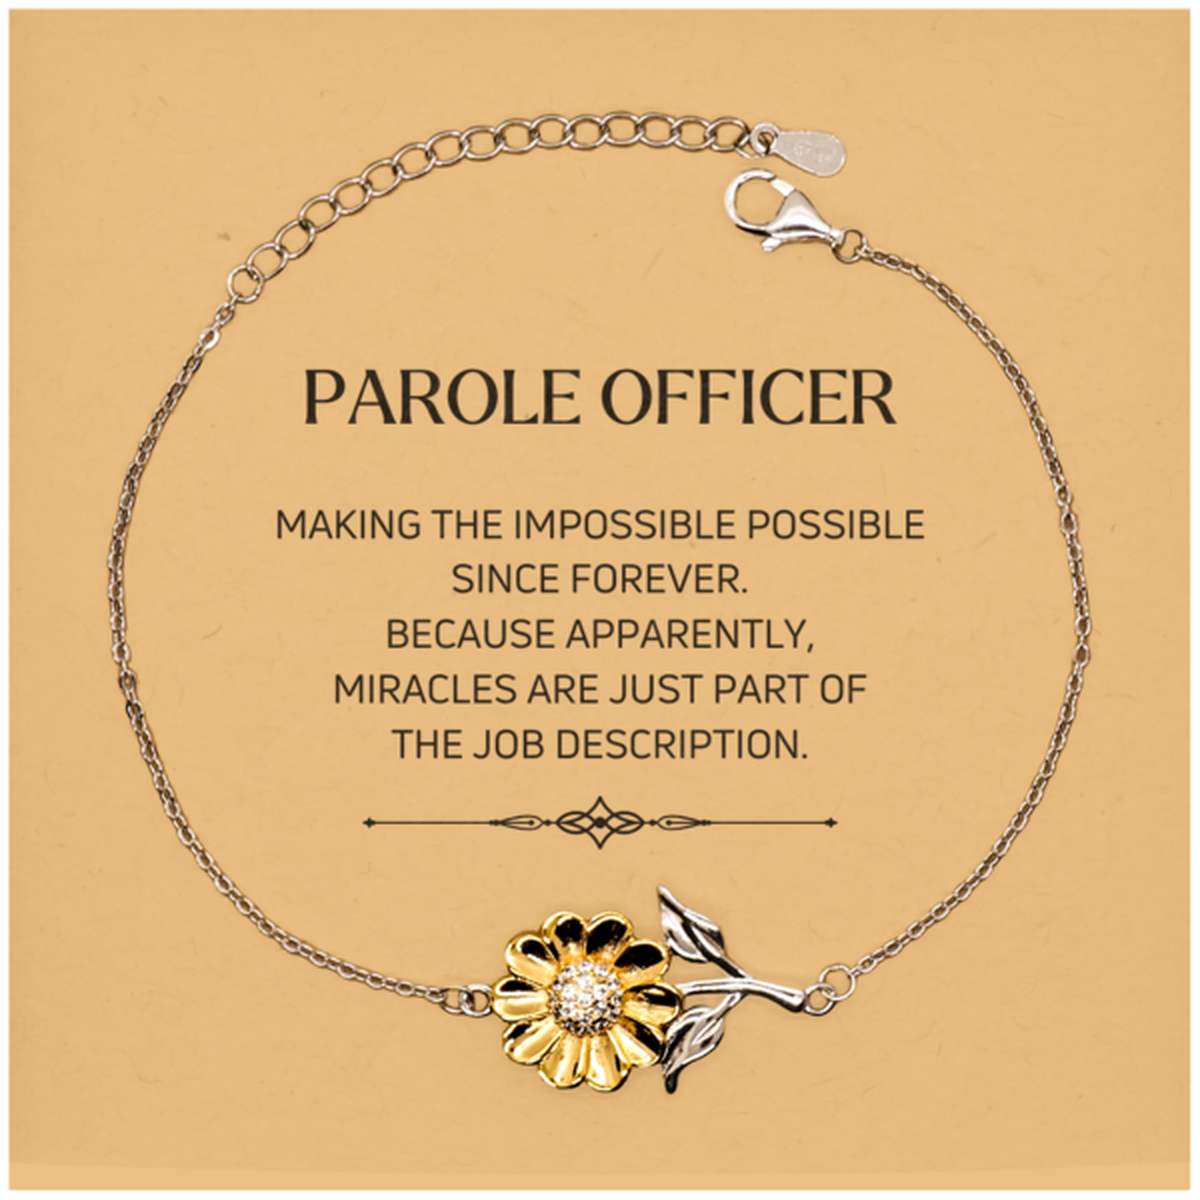 Funny Parole Officer Gifts, Miracles are just part of the job description, Inspirational Birthday Christmas Sunflower Bracelet For Parole Officer, Men, Women, Coworkers, Friends, Boss